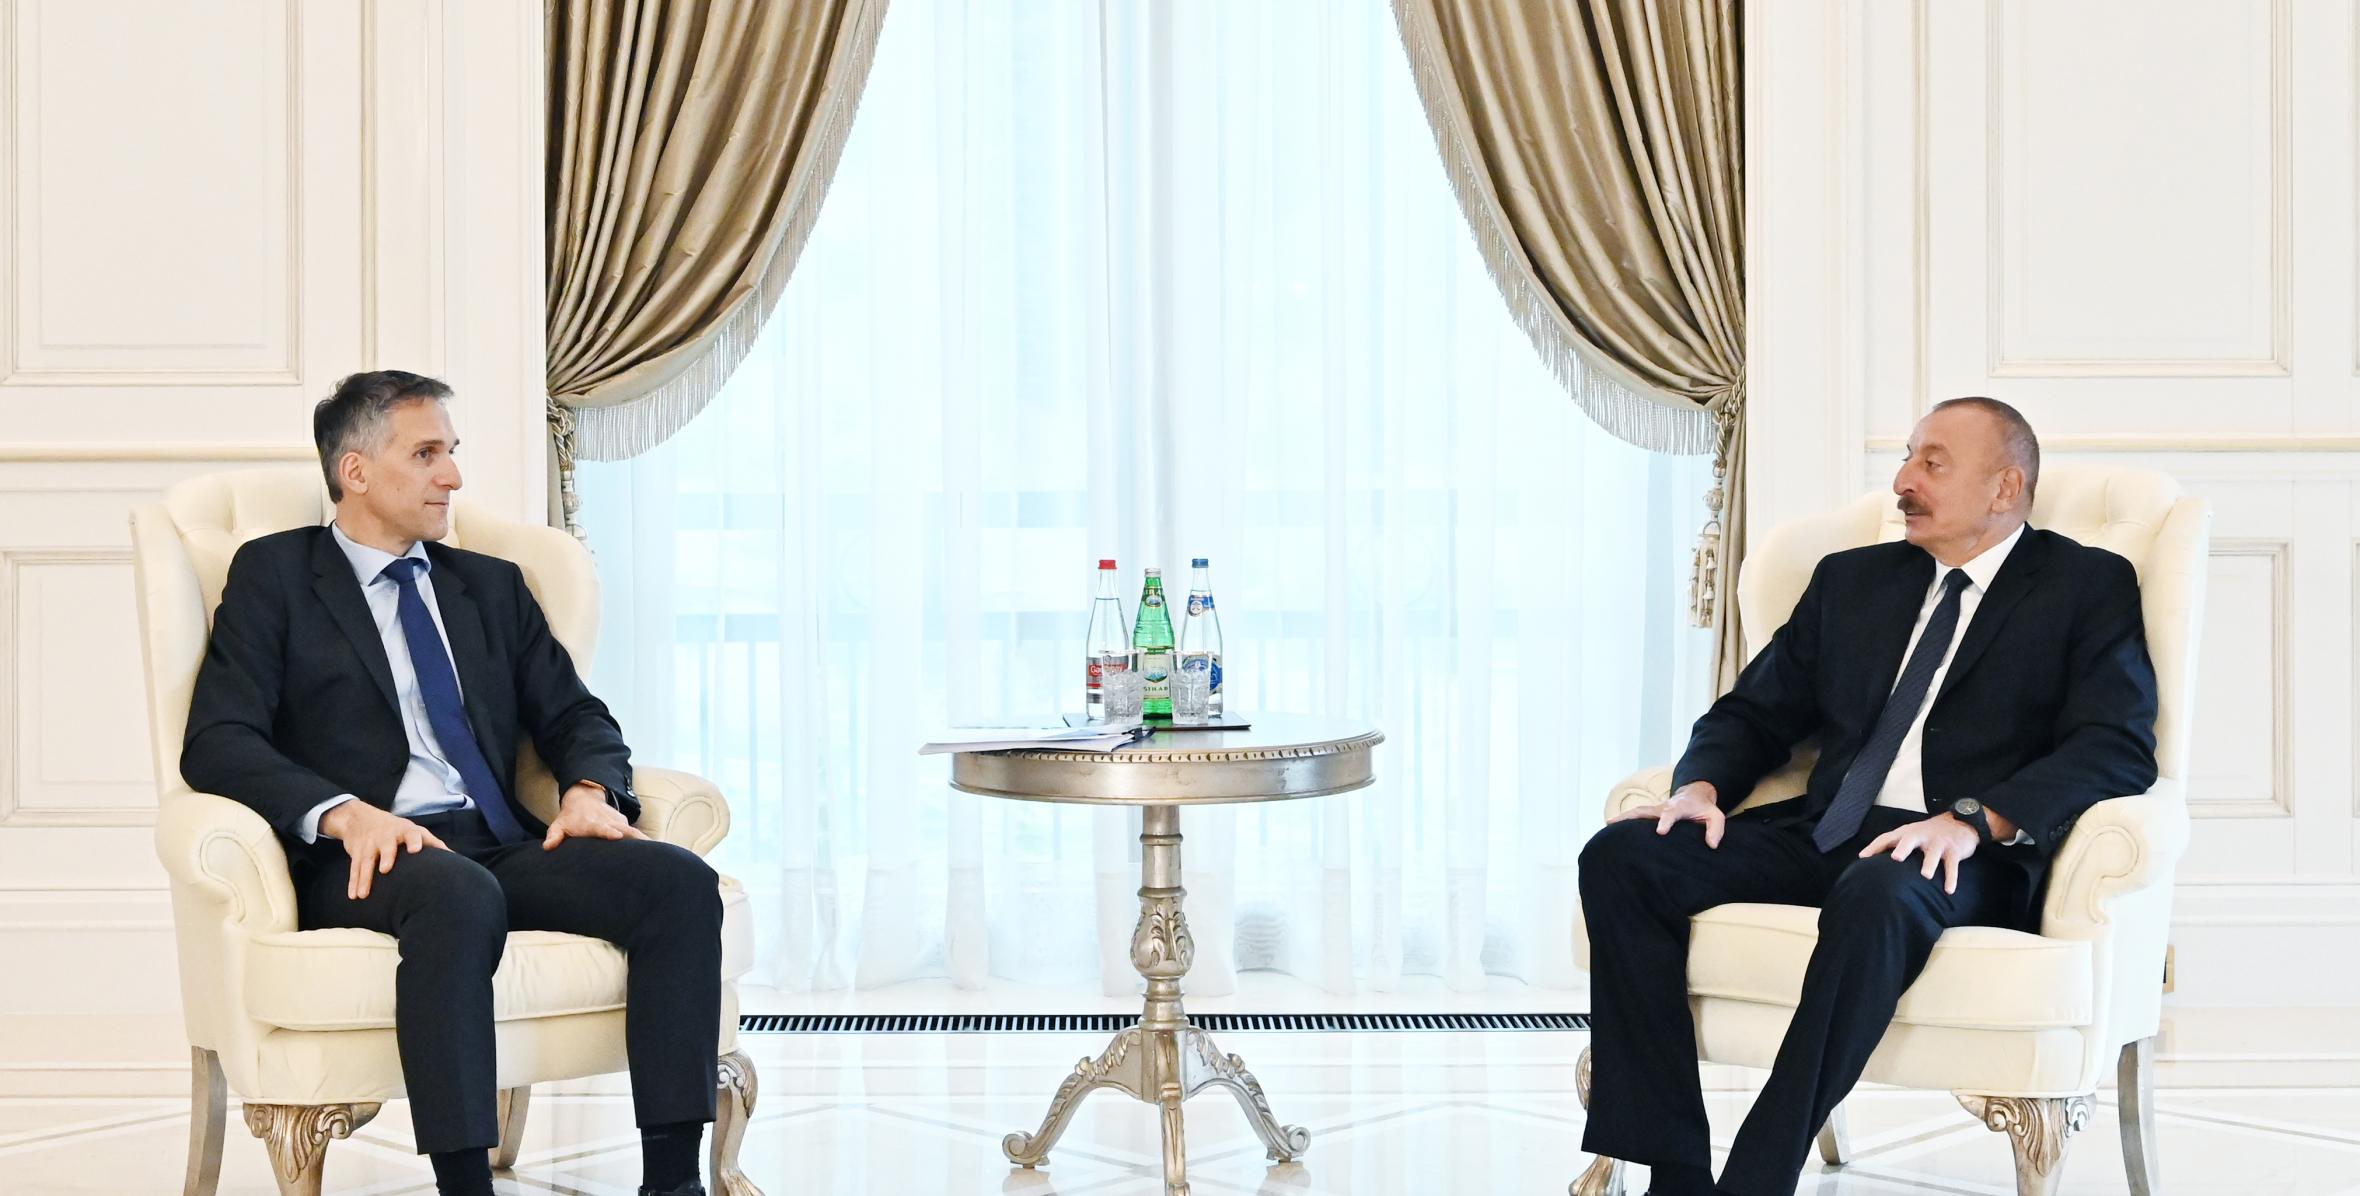 Ilham Aliyev received Chief Executive Officer and other senior officials of Signify